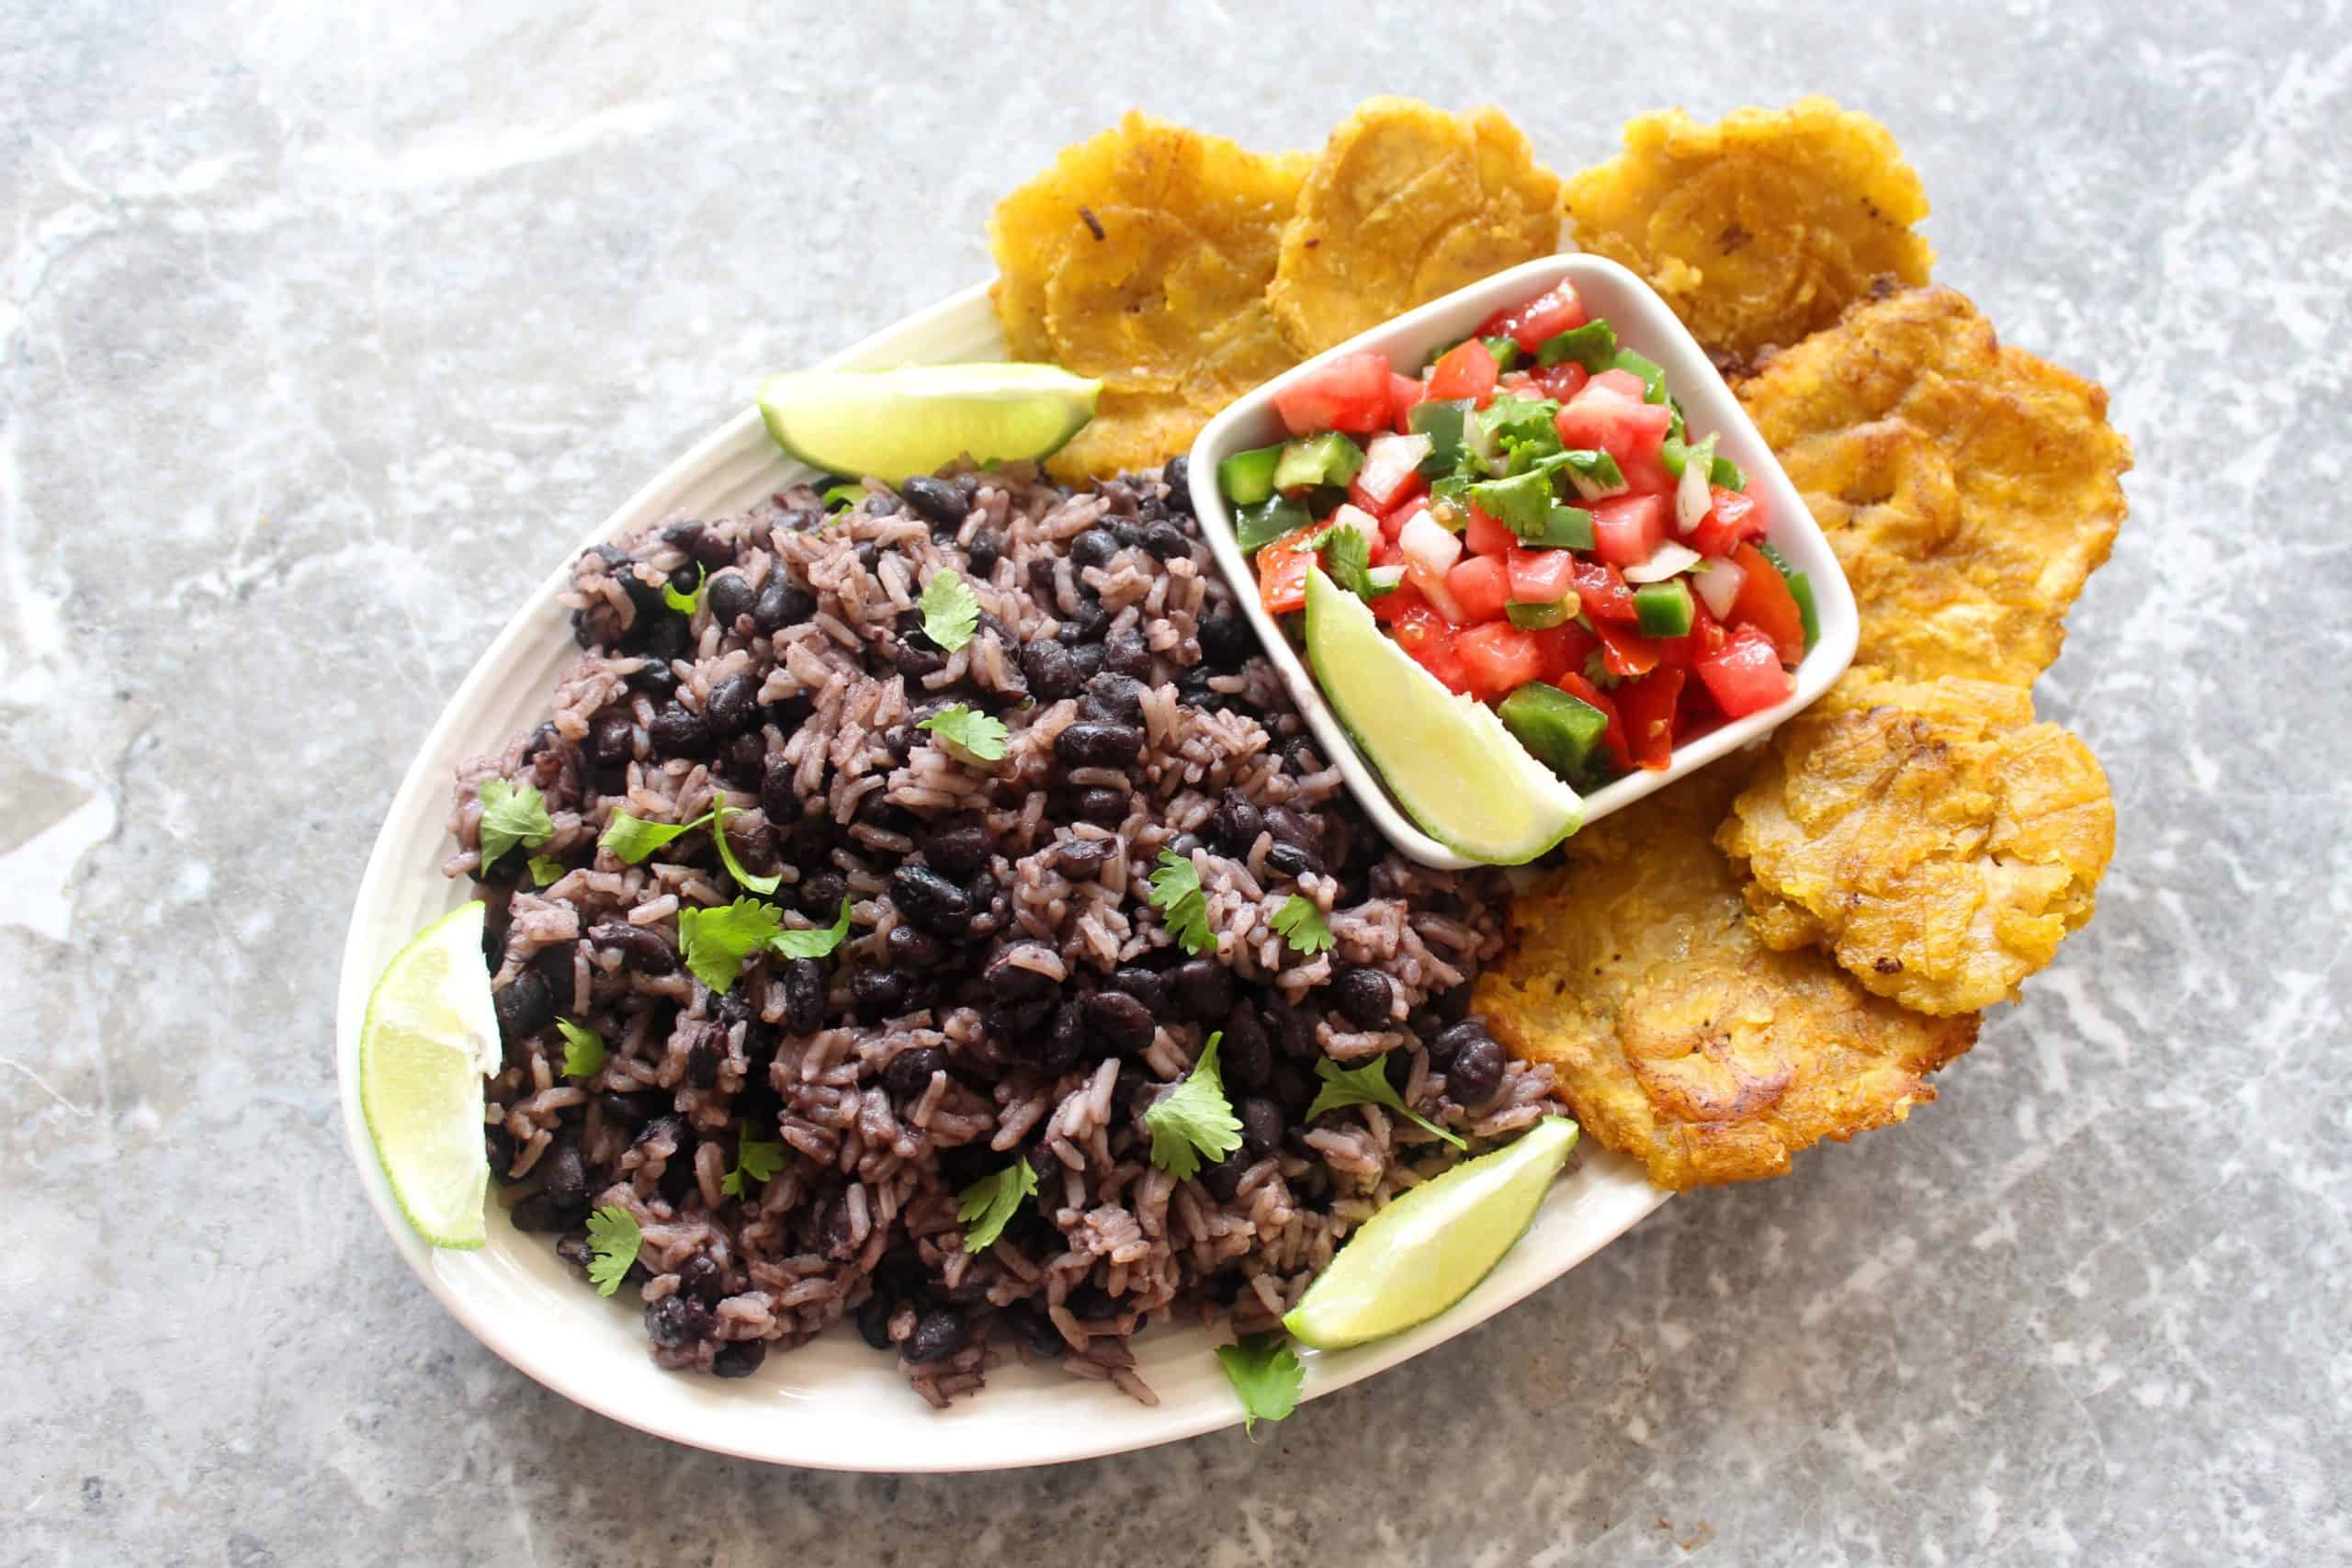 A platter with rice and black beans, pico de gallo, lime wedges and tostones.